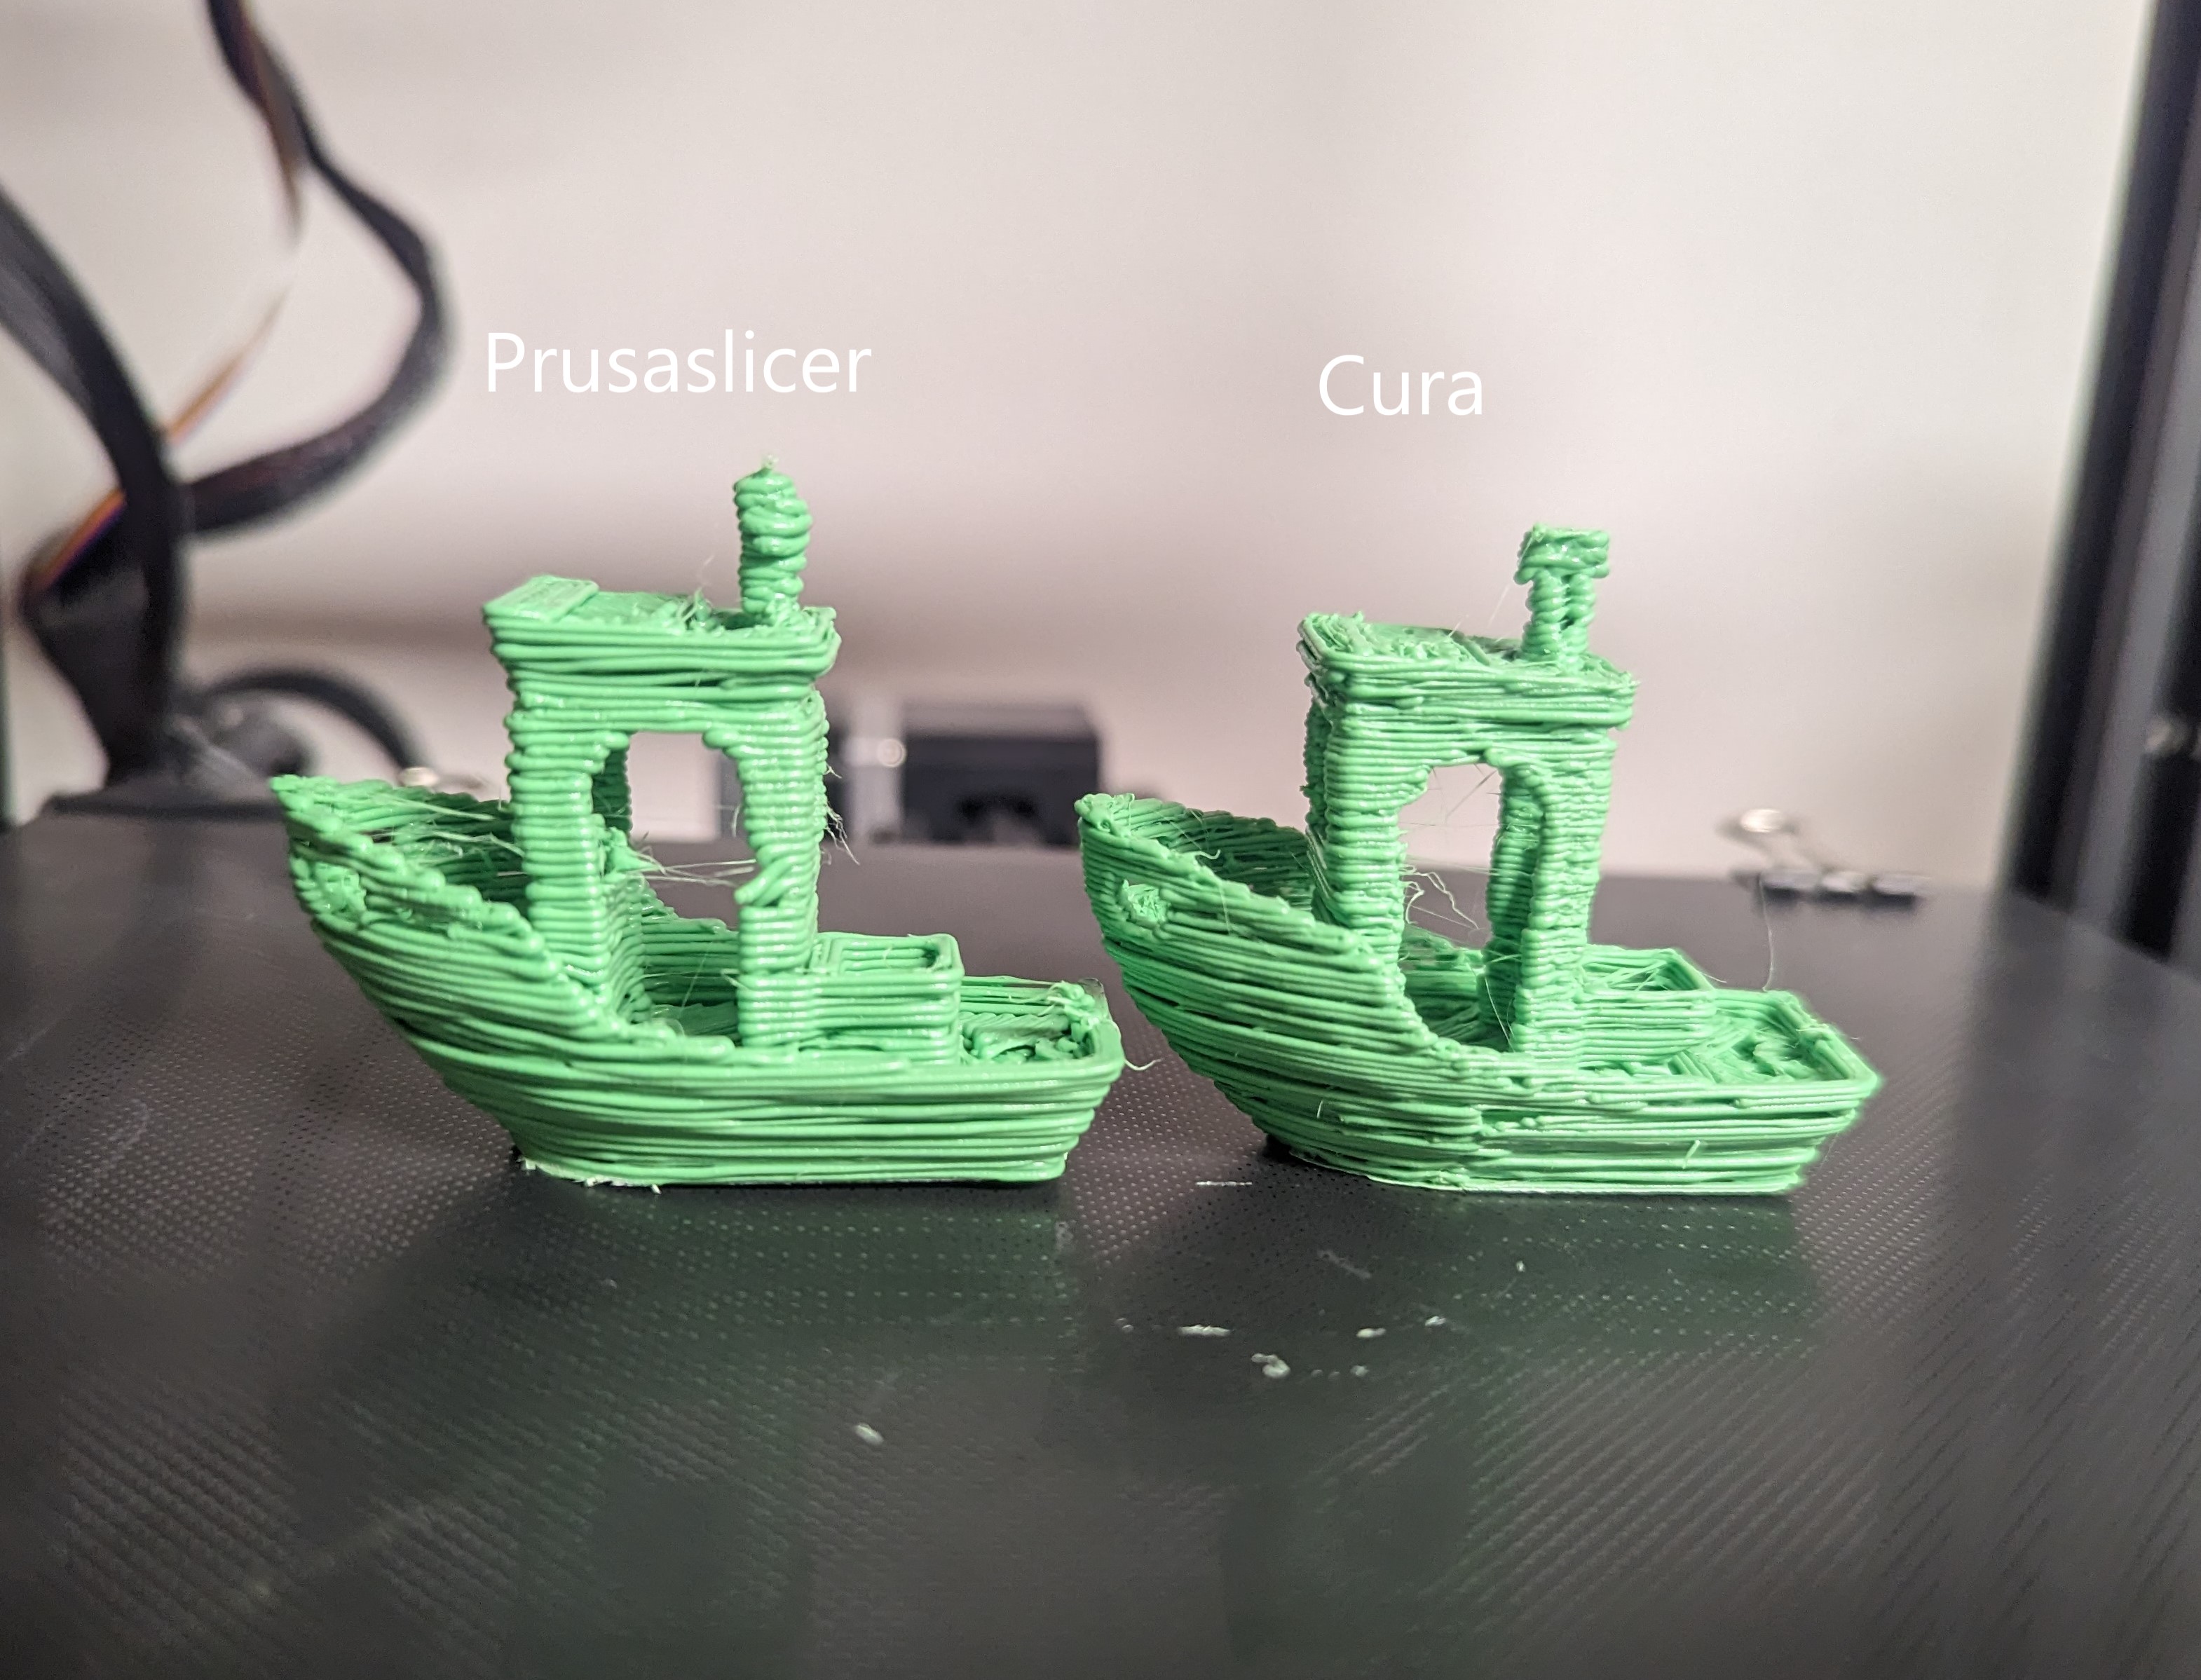 Comparison of Cura and Prusaslicer